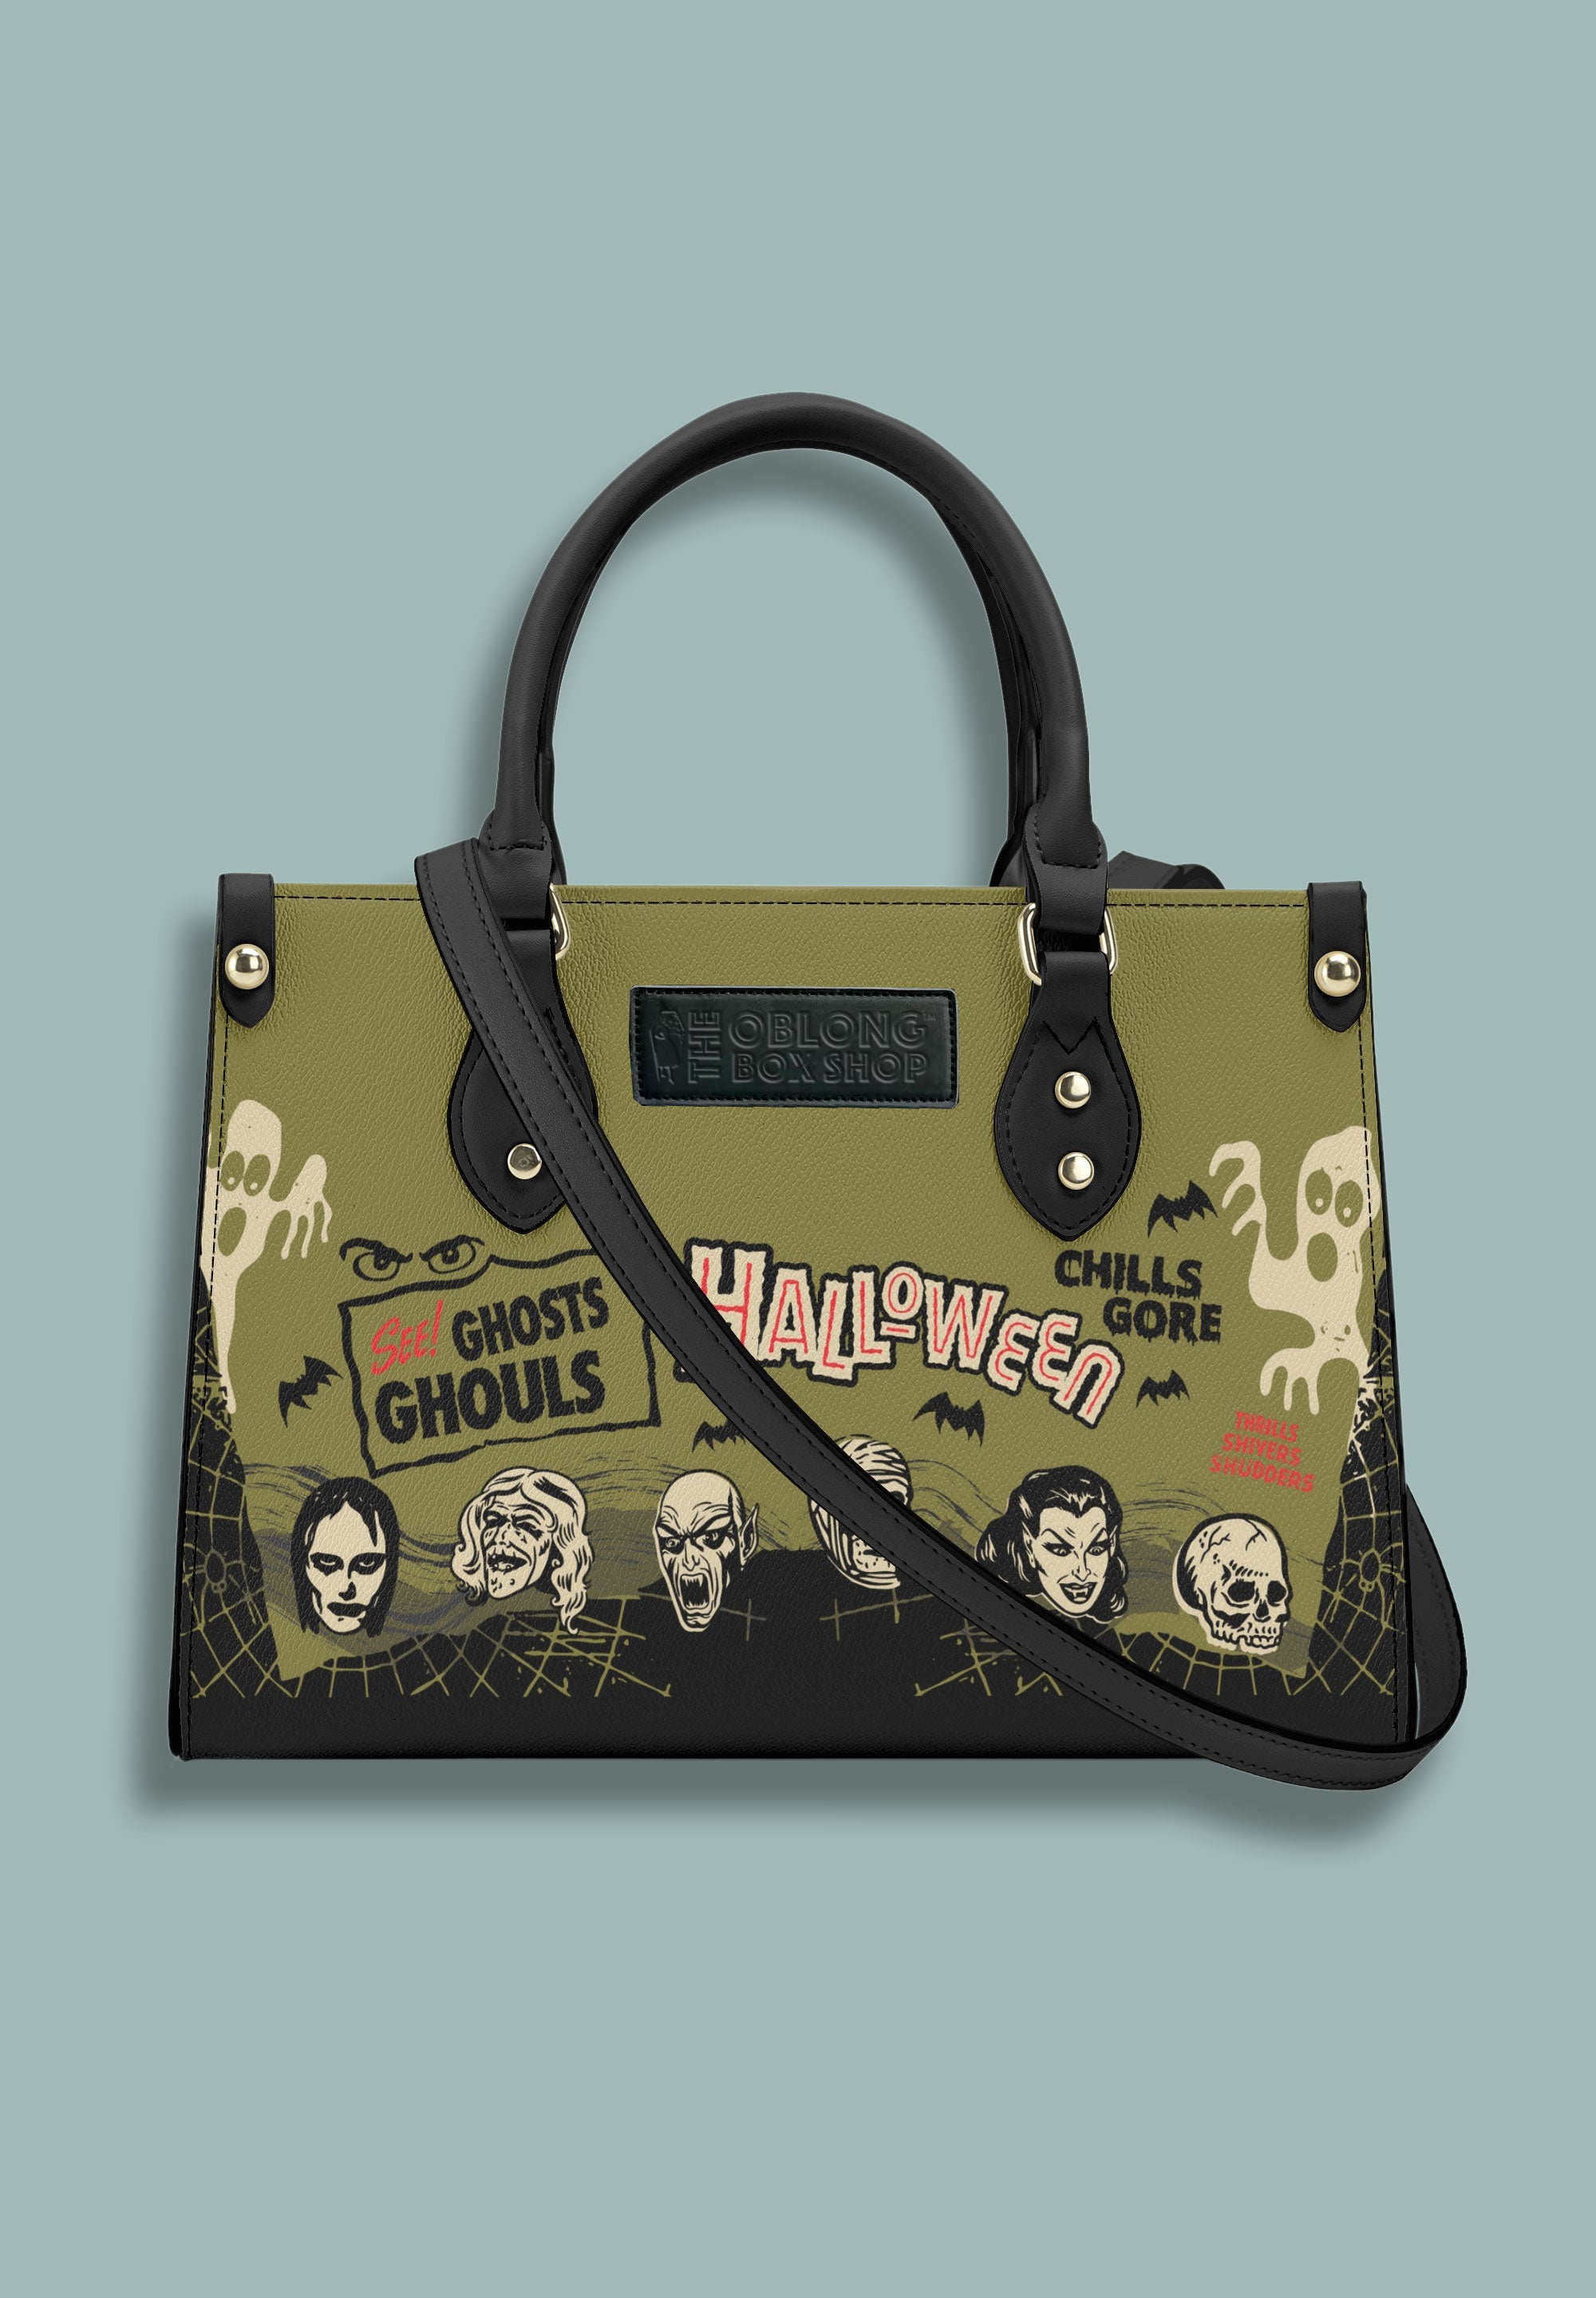 Vintage Ghosts & Ghouls Halloween Purse – The Oblong Box Shop™